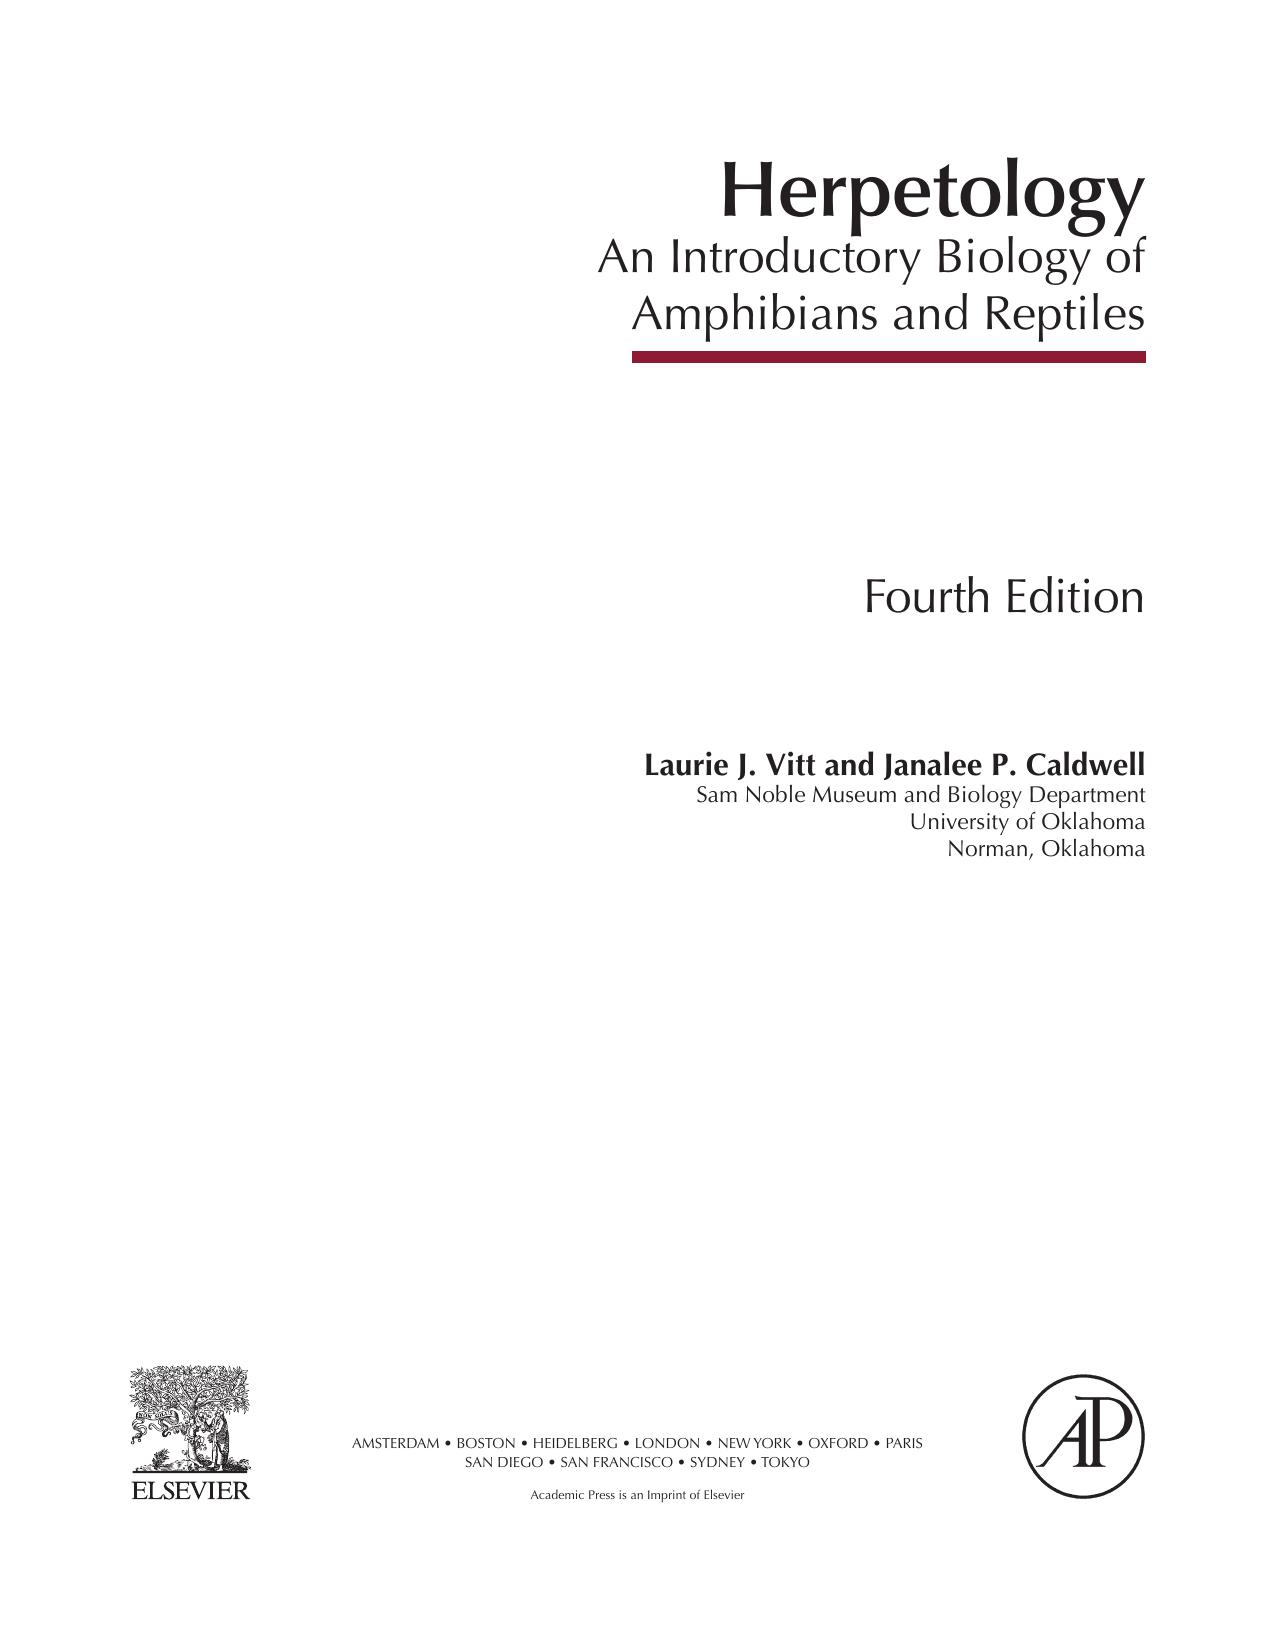 Herpetology. An Introductory Biology of Amphibians and Reptiles 2014